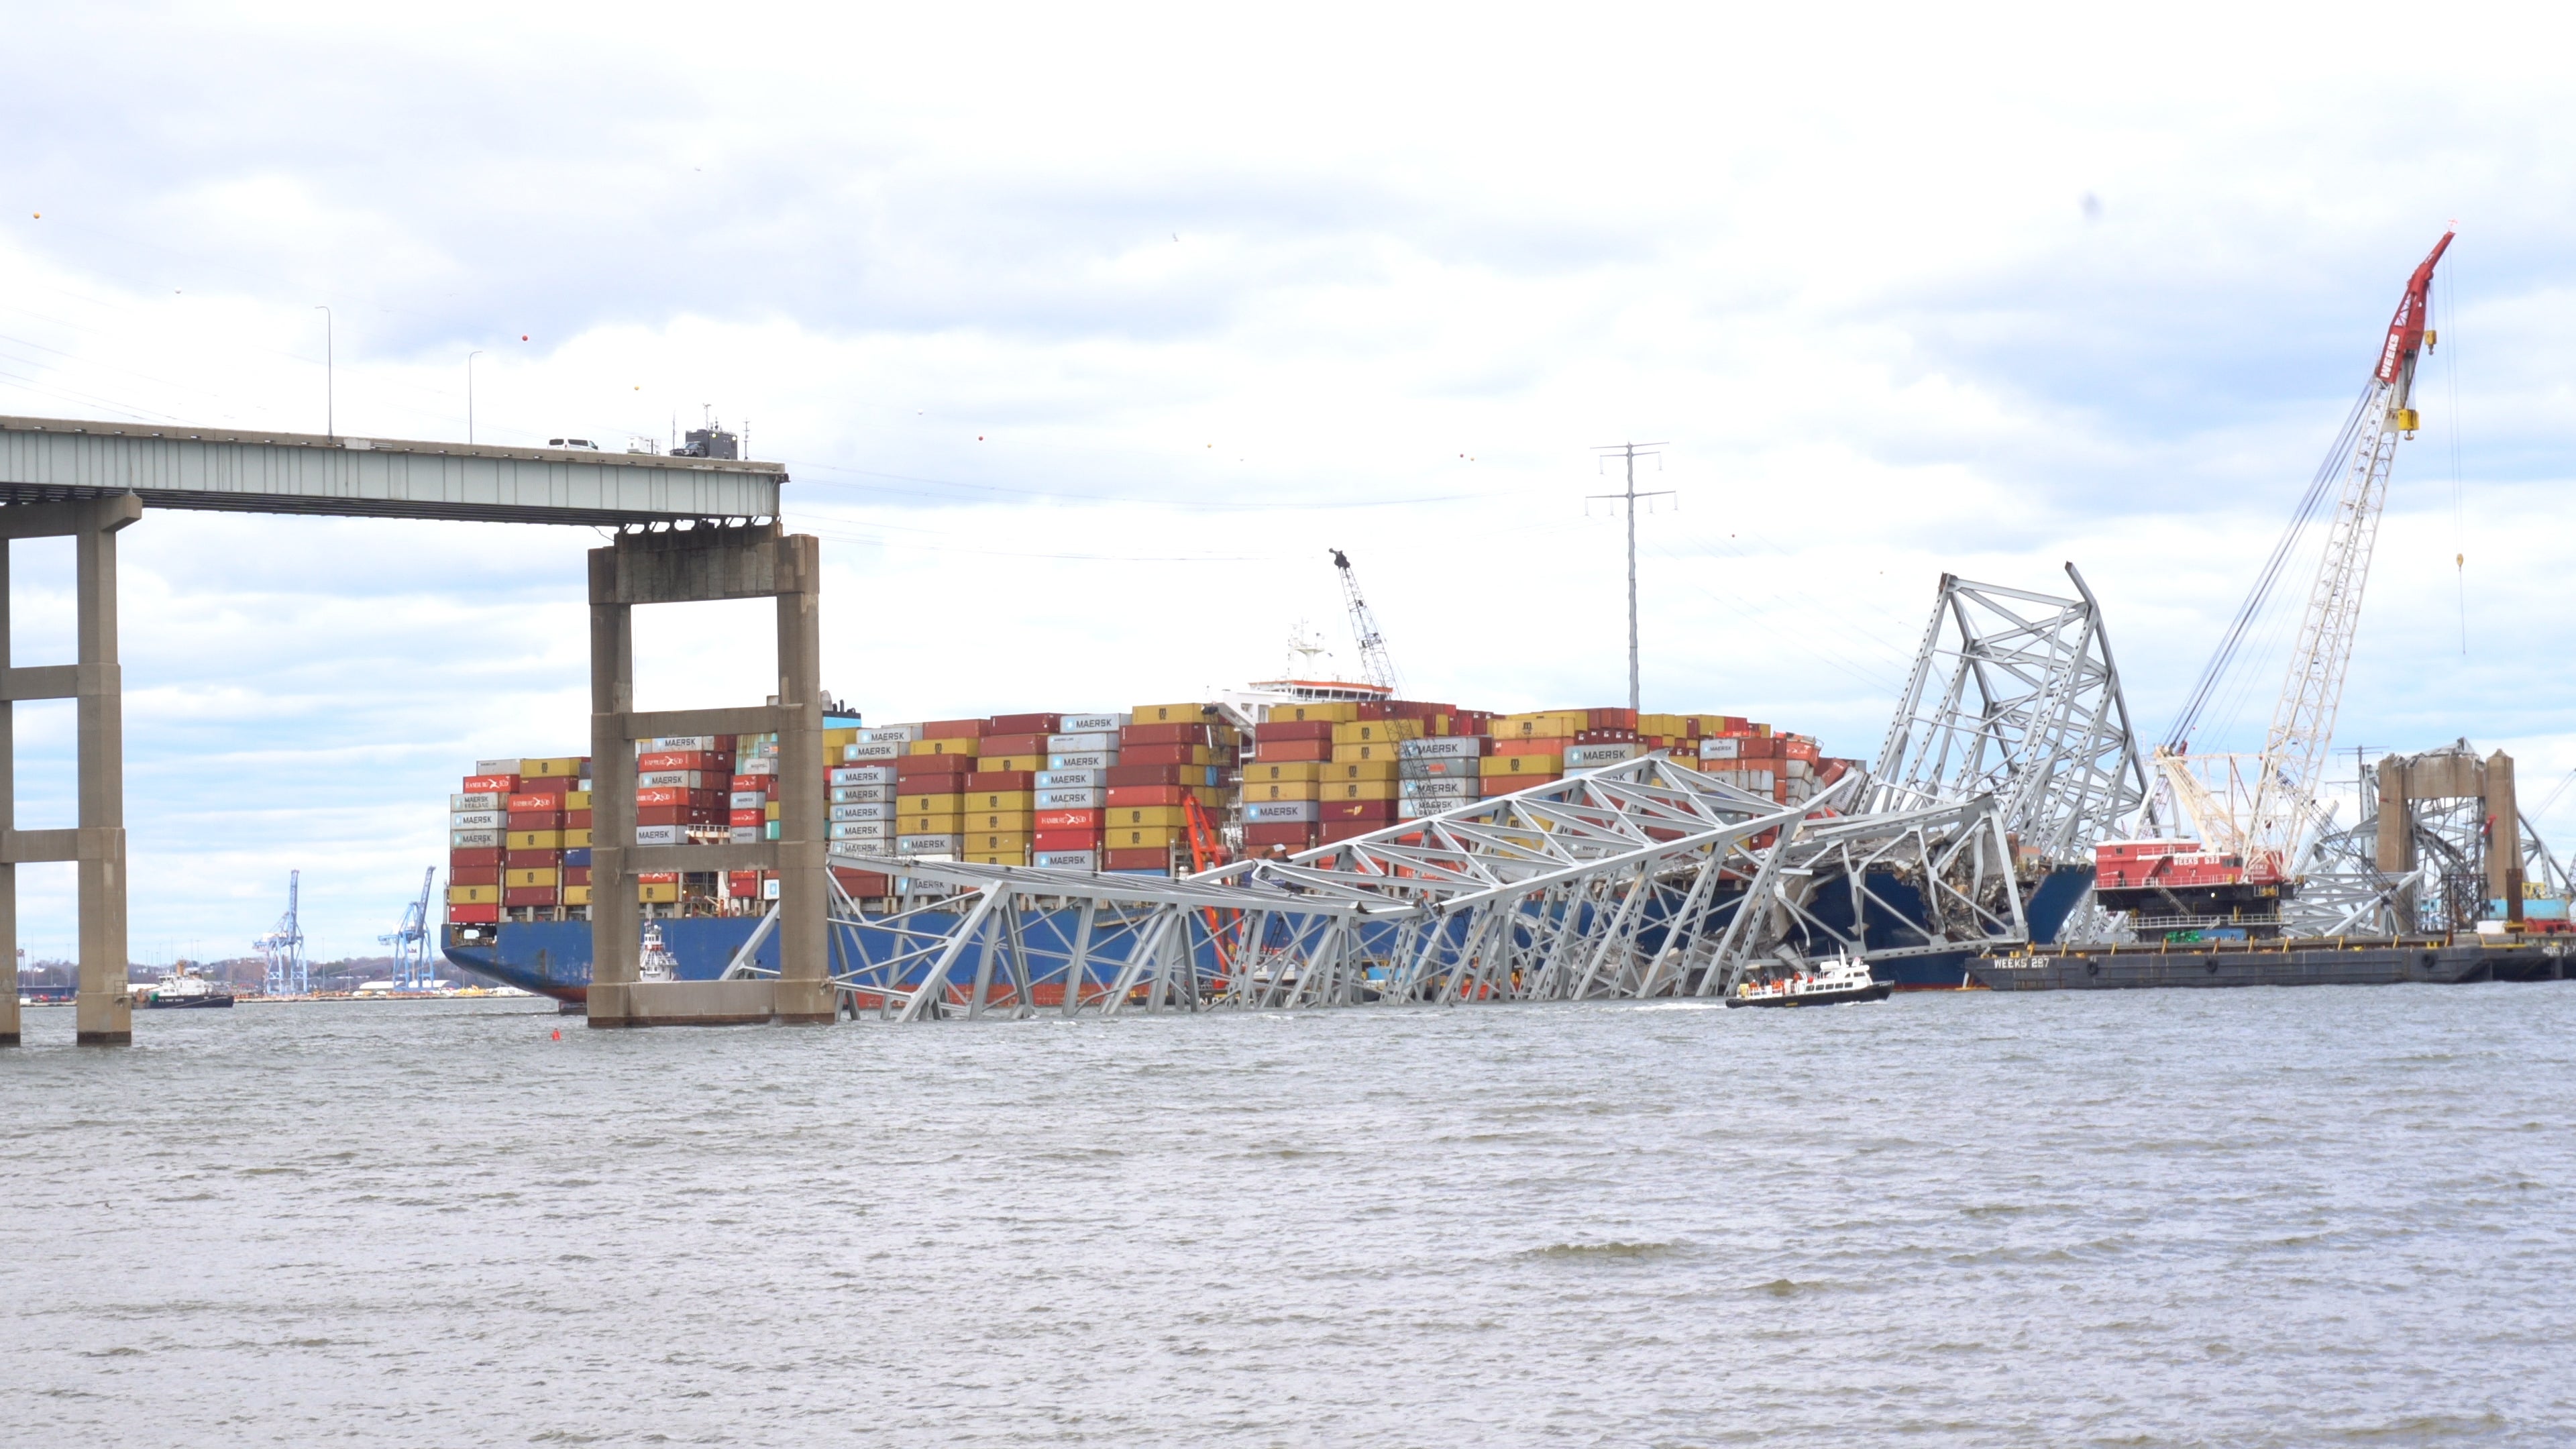 The Francis Scott Key Bridge in Baltimore was struck by a cargo ship called “Dali” on 26 March. Authorities, including the US Coast Guard and Maryland State Police continue working to reopen the bridge